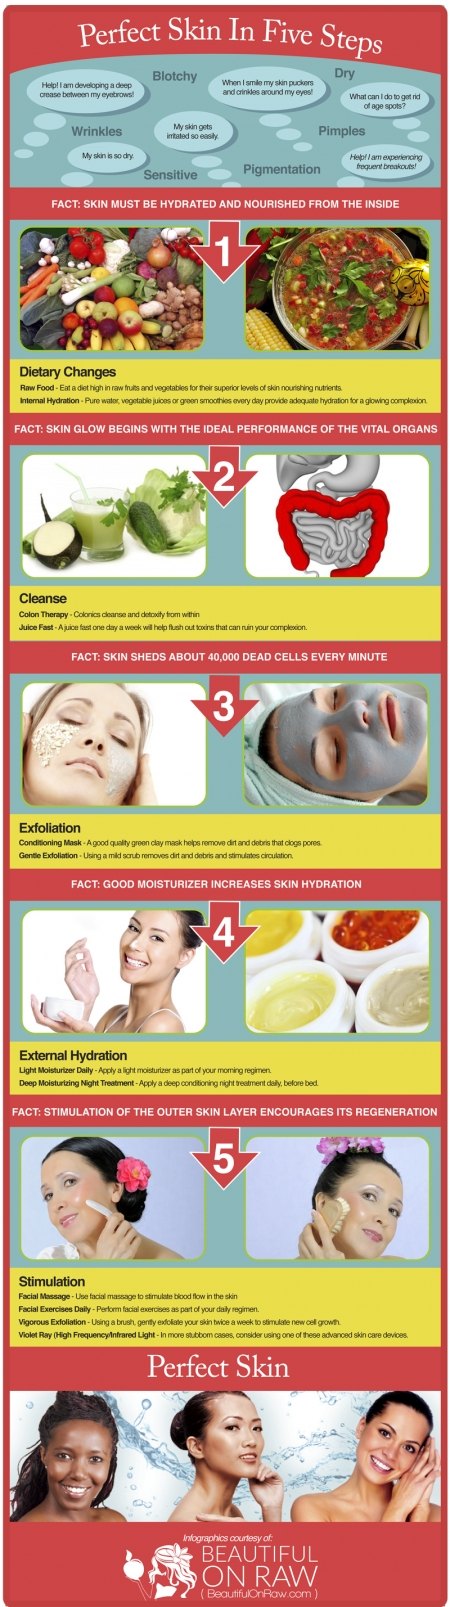 get perfect skin in 5 easy steps